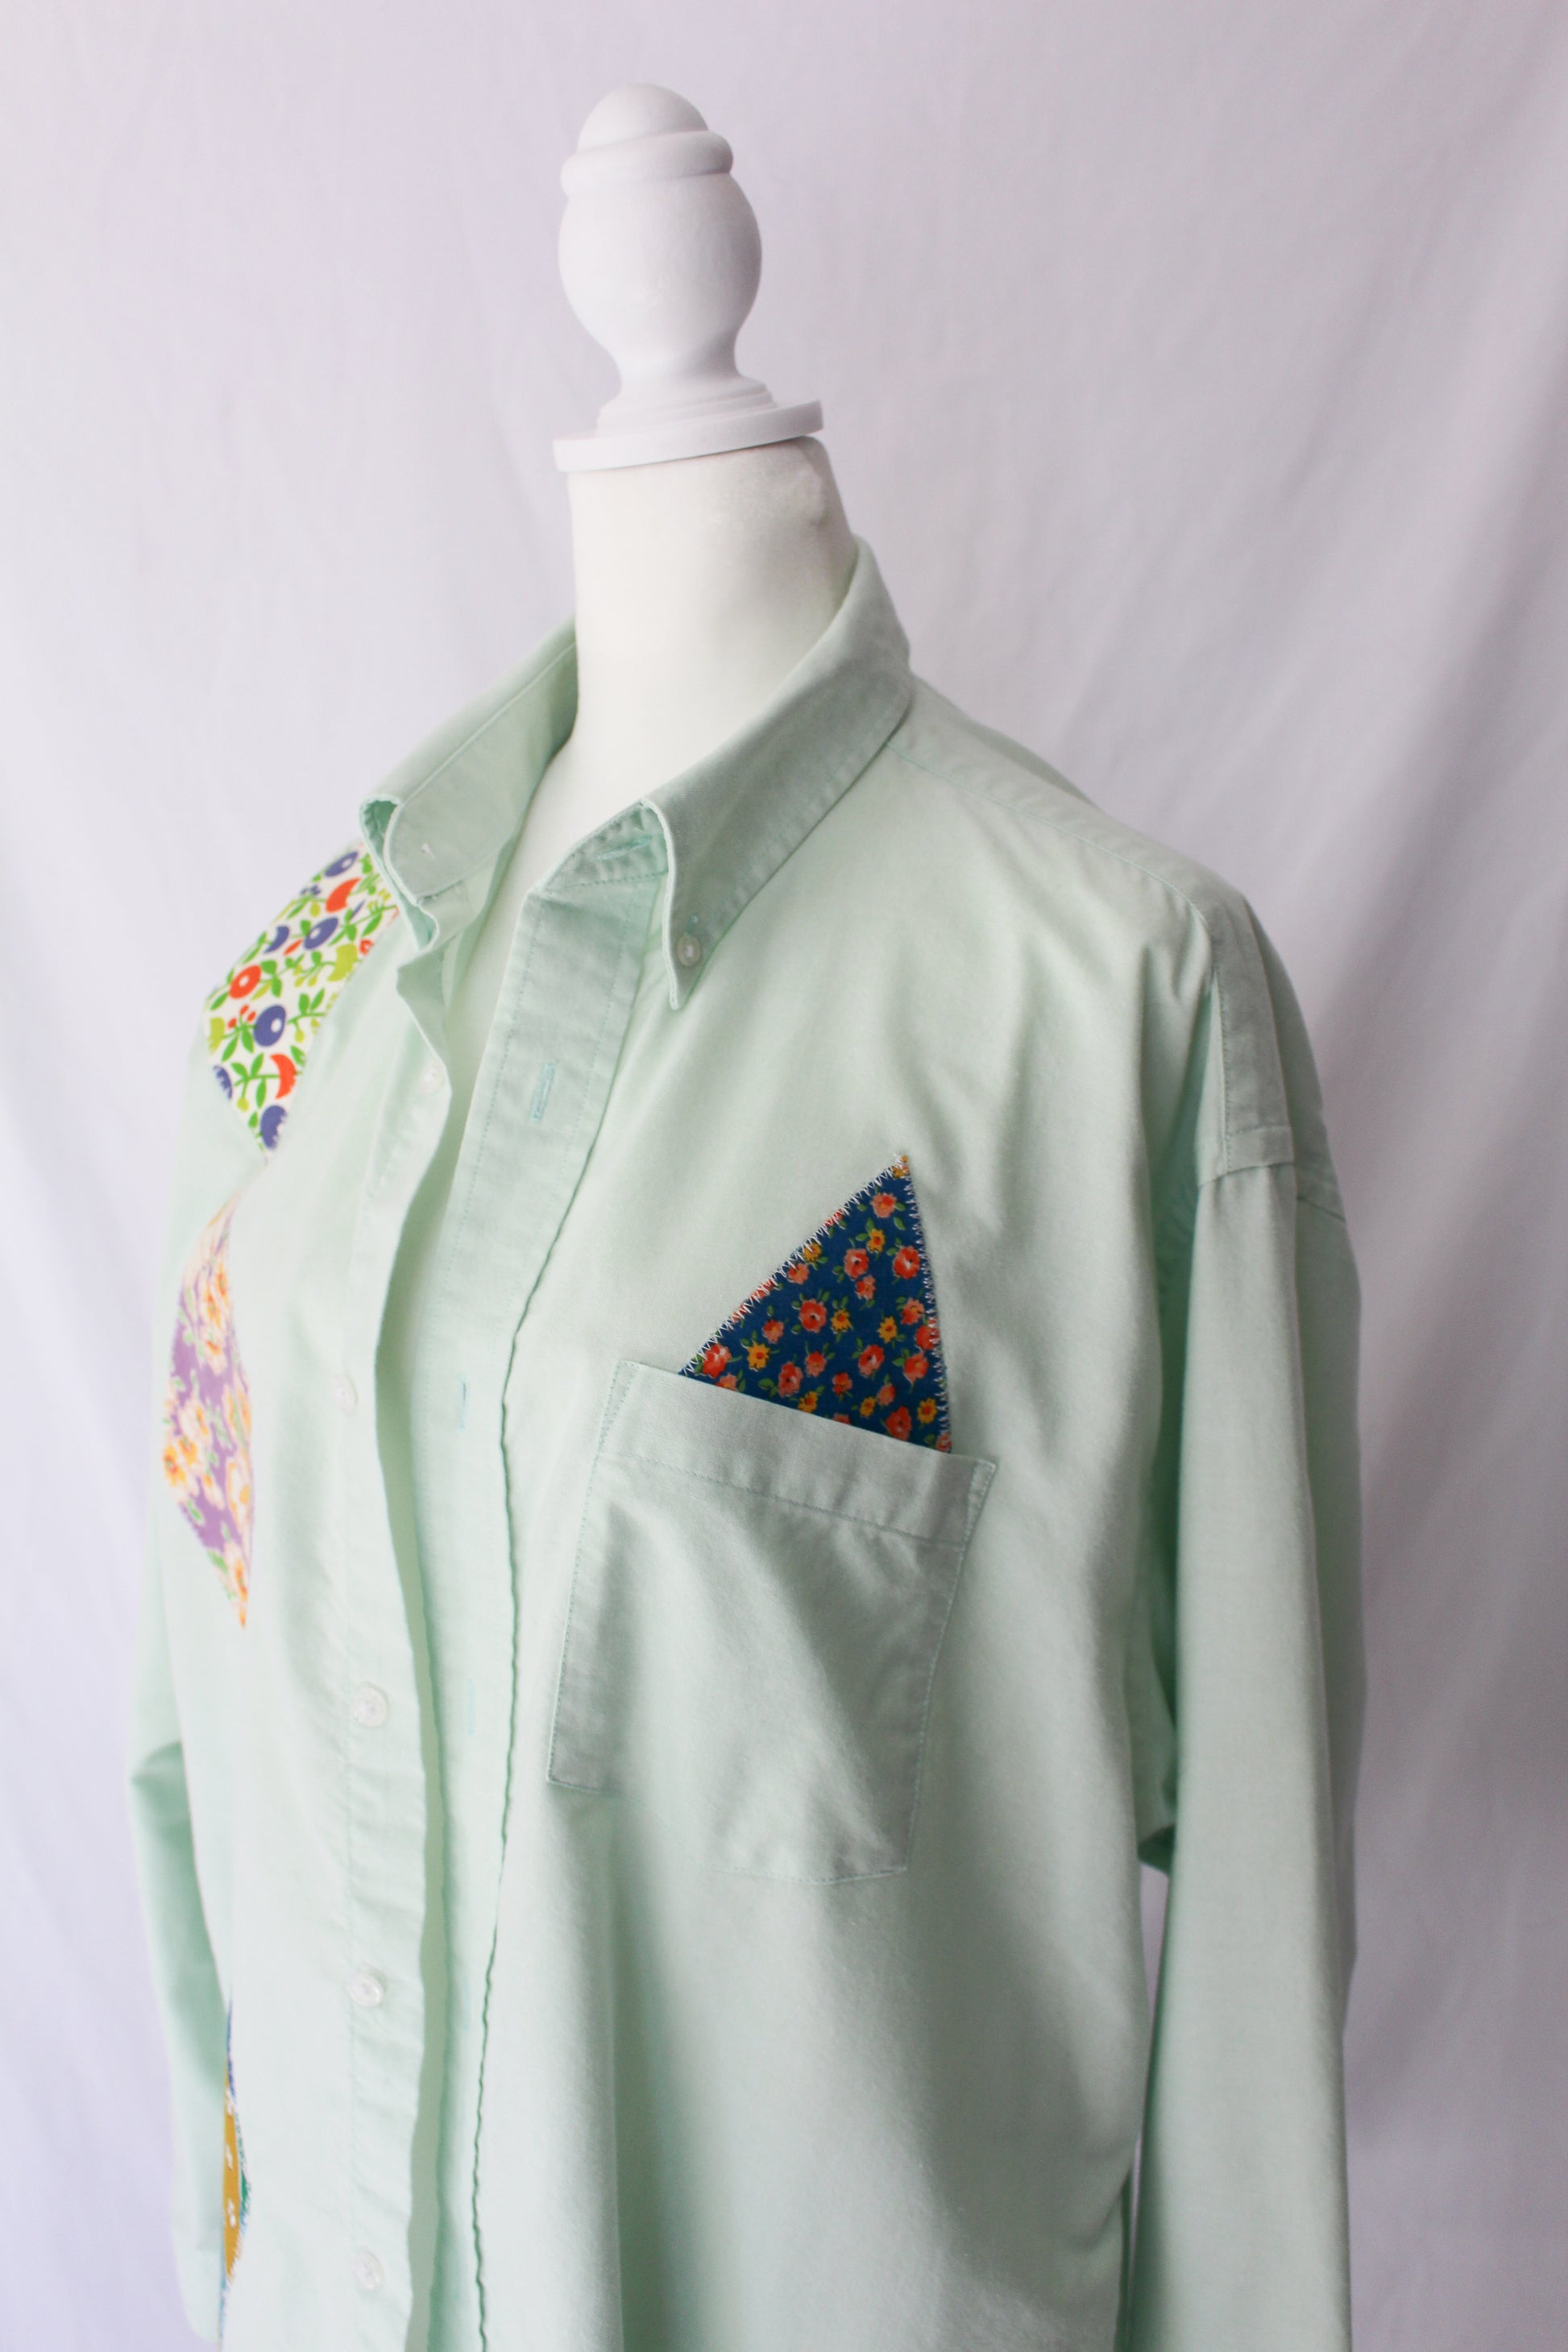 patchwork diamond and triangle patches, upcycled shirt